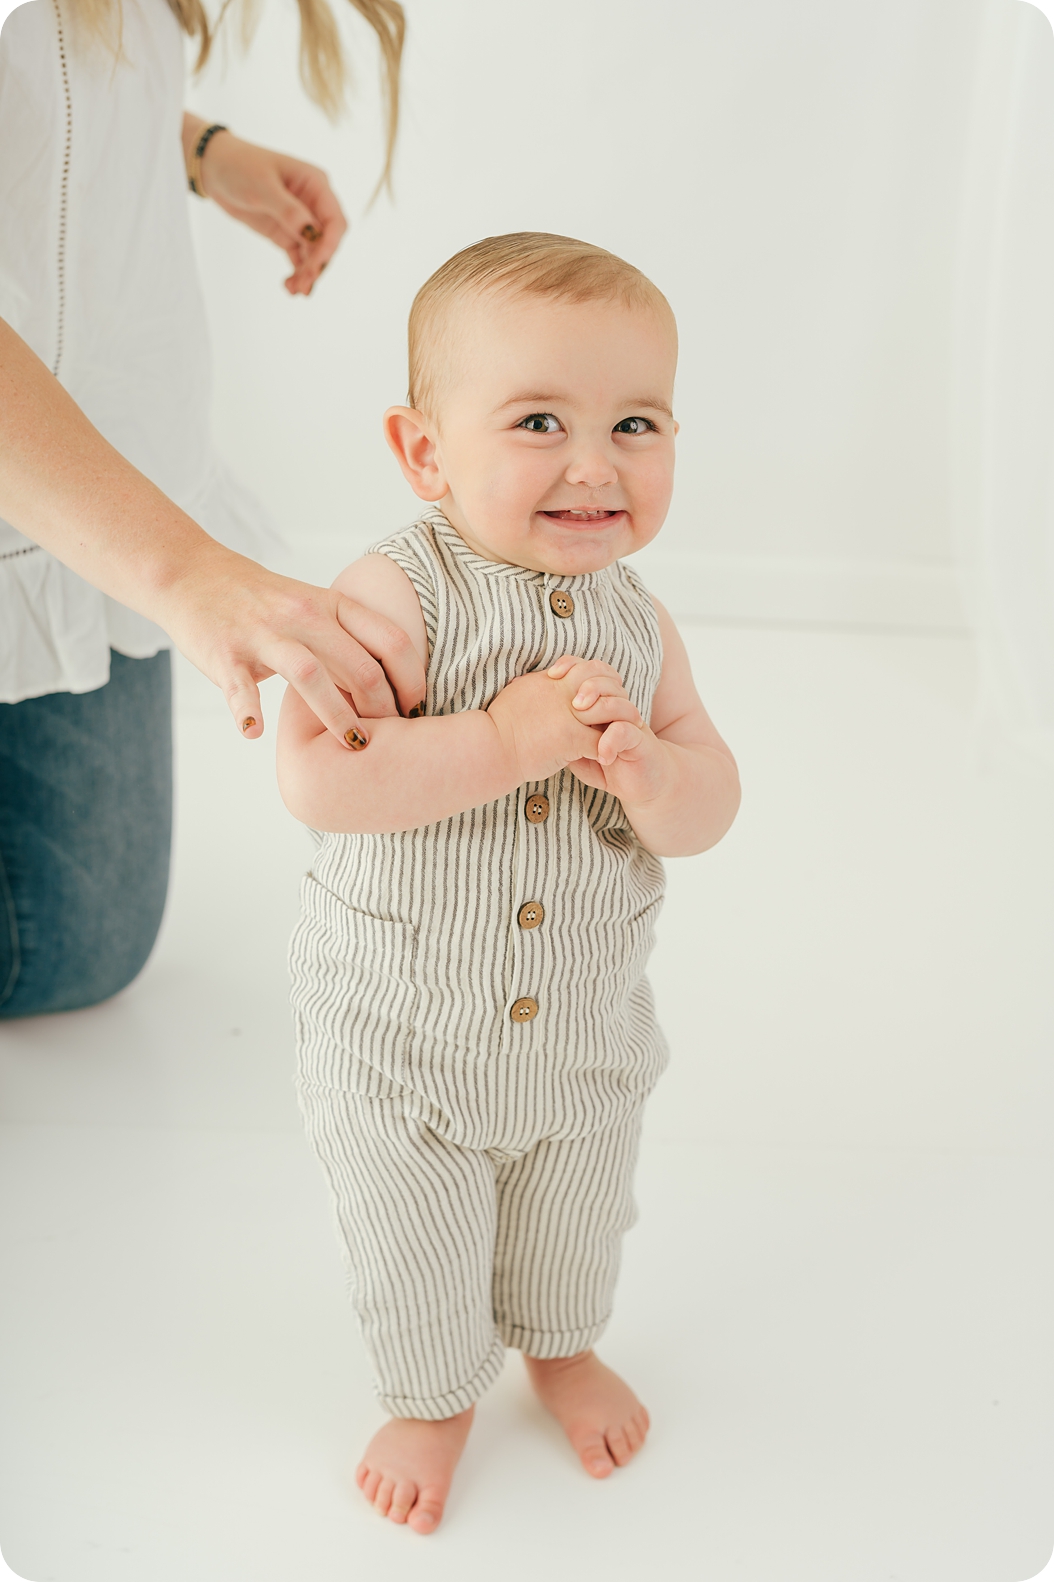 baby giggles during timeless first birthday portraits in Utah studio 